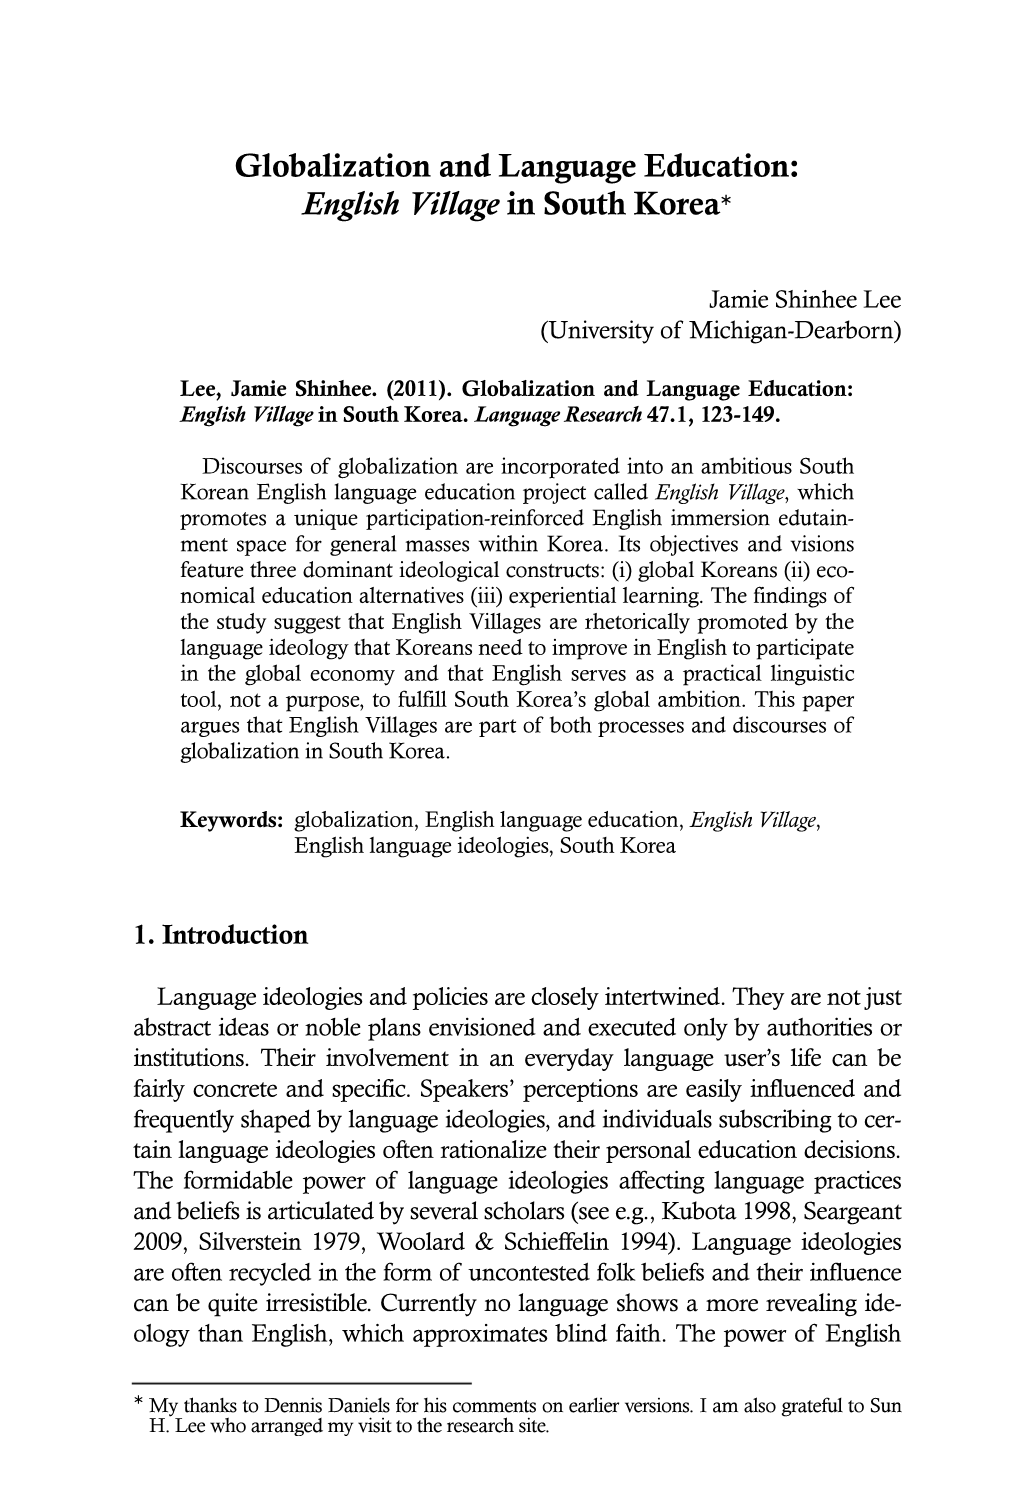 Globalization and Language Education: English Village in South Korea